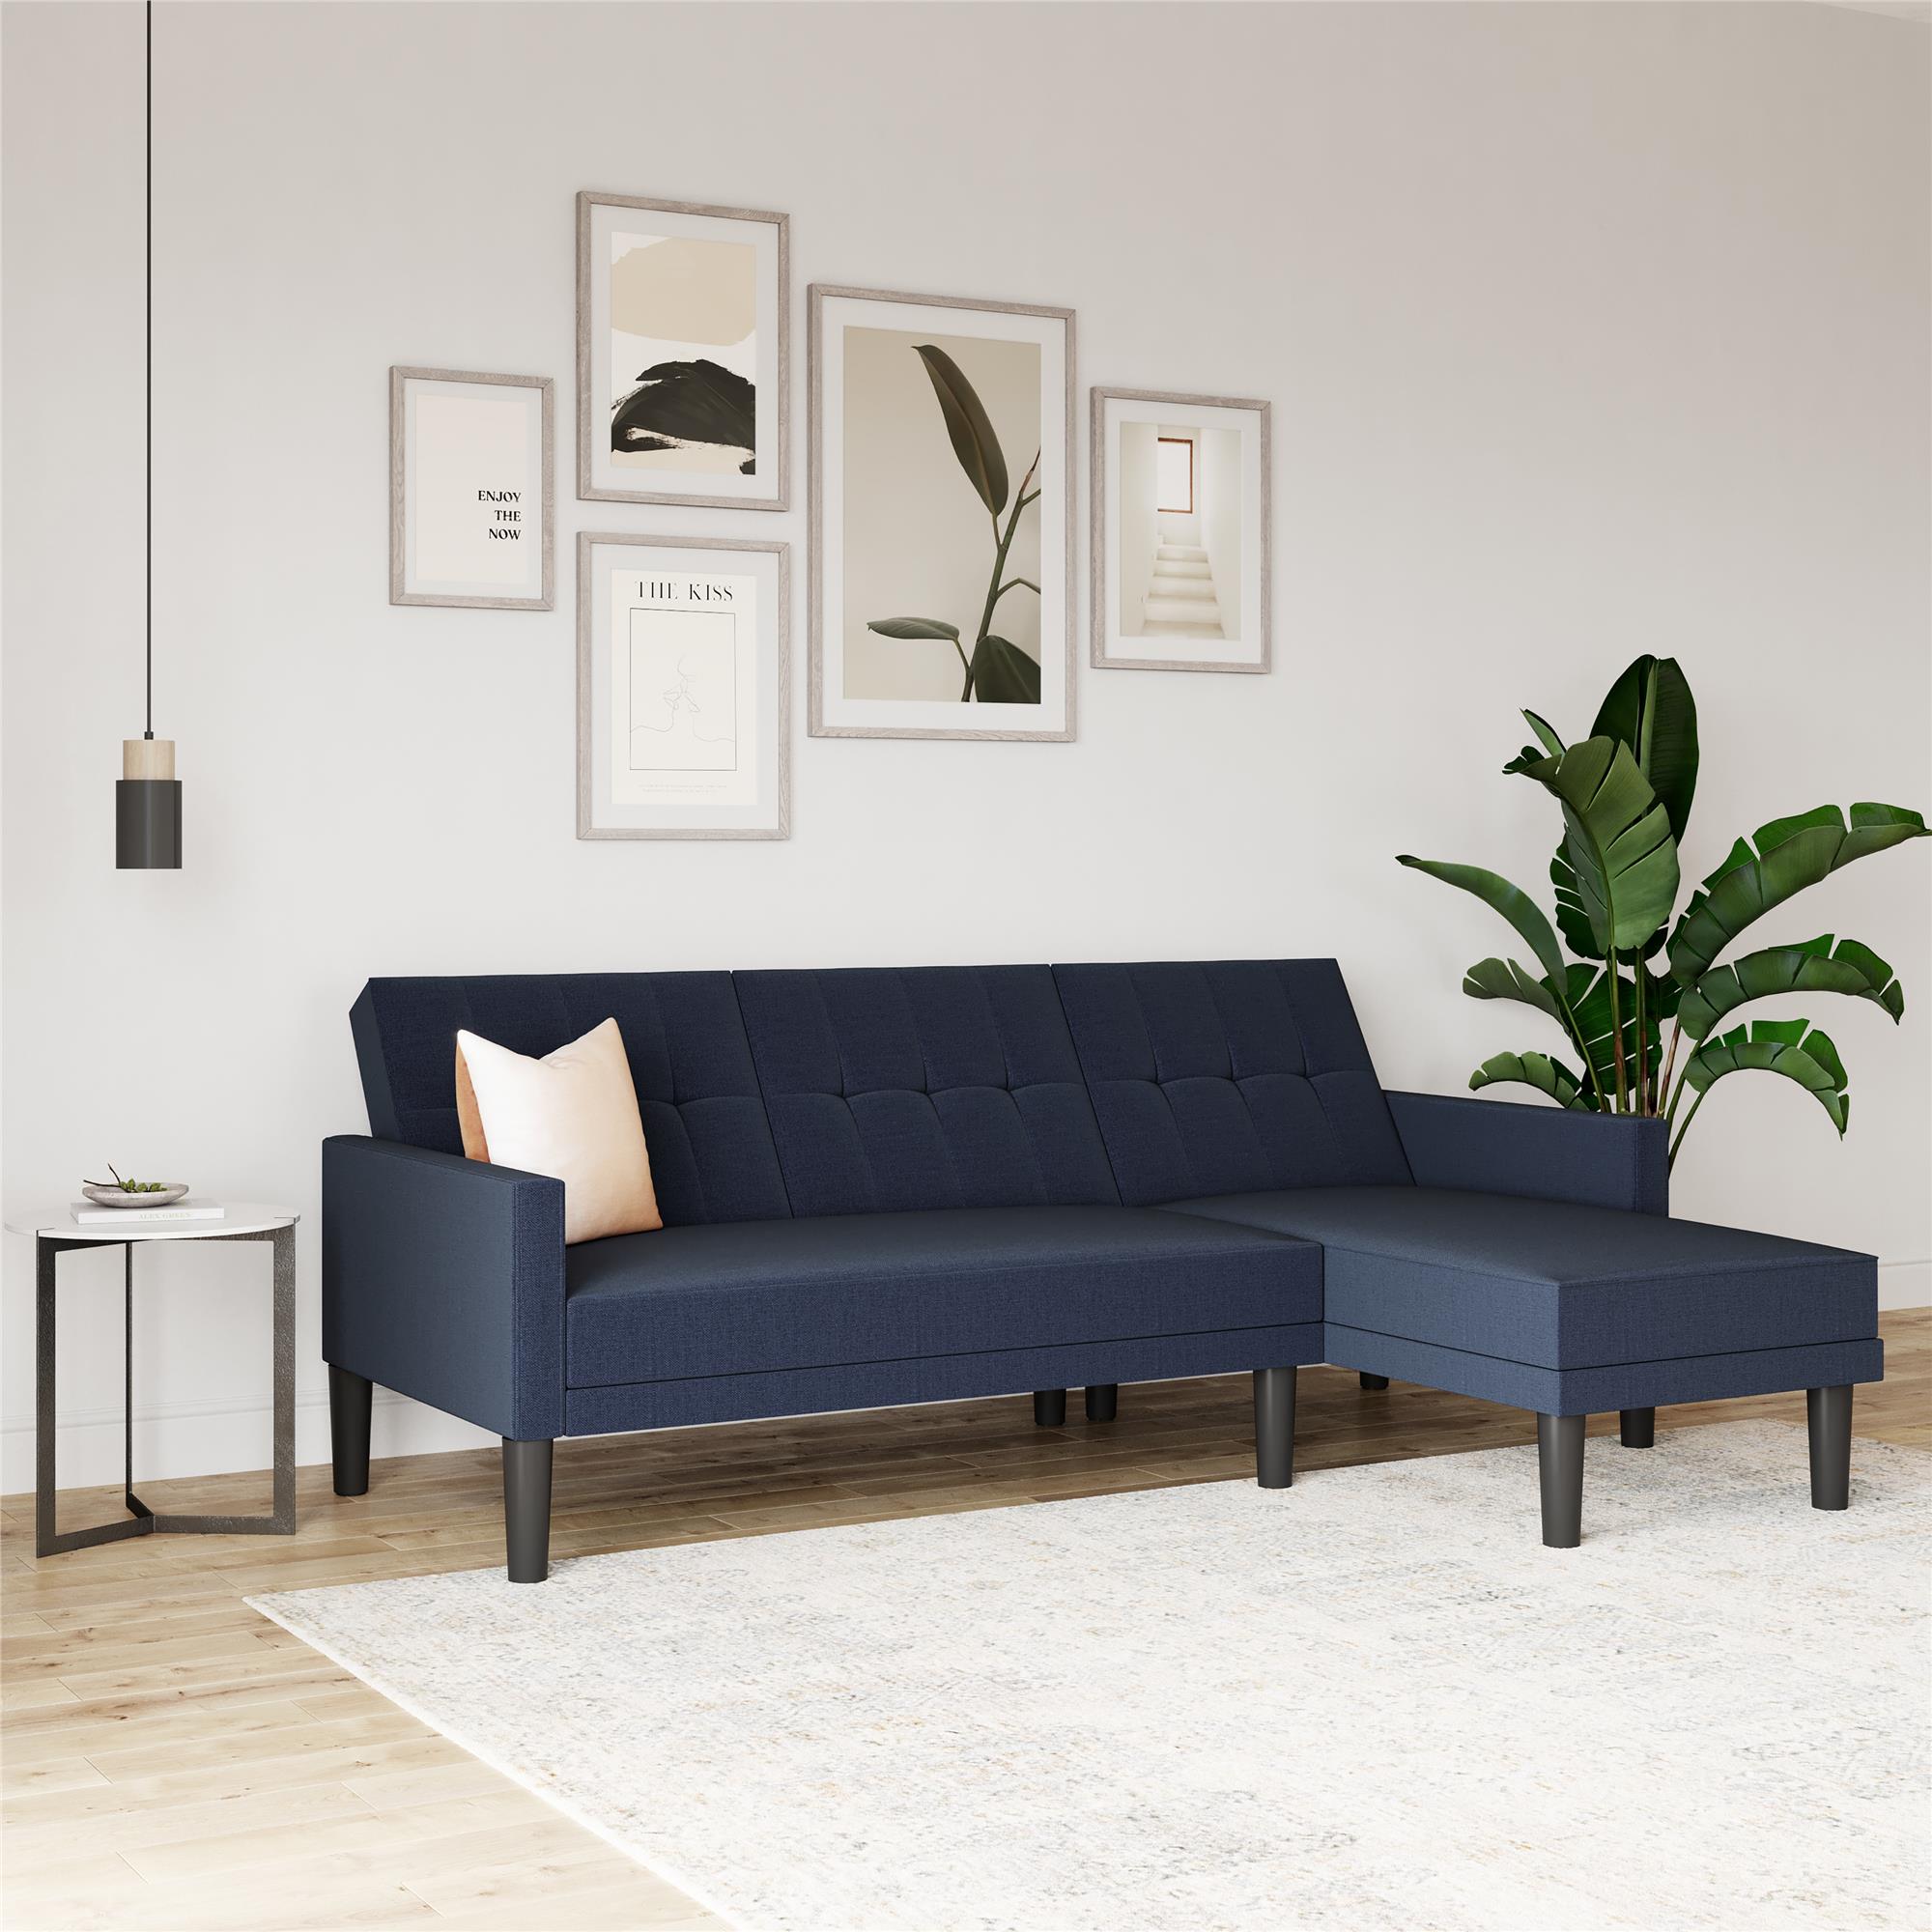 DHP Hudson Small Space Sectional Sofa Futon, Blue Linen - image 1 of 19